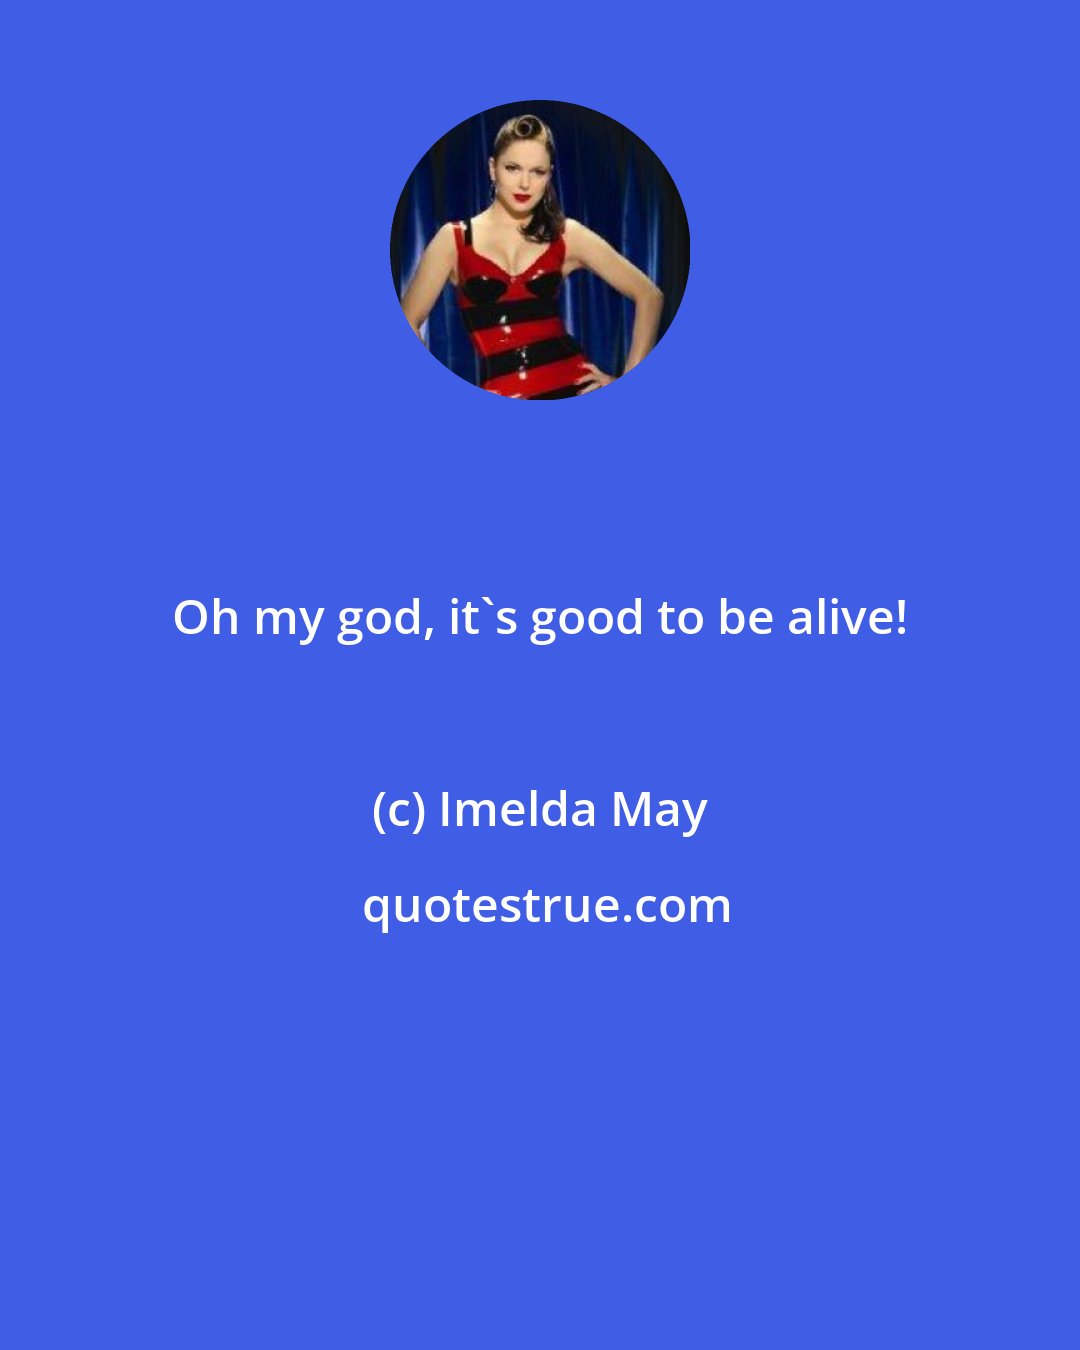 Imelda May: Oh my god, it's good to be alive!